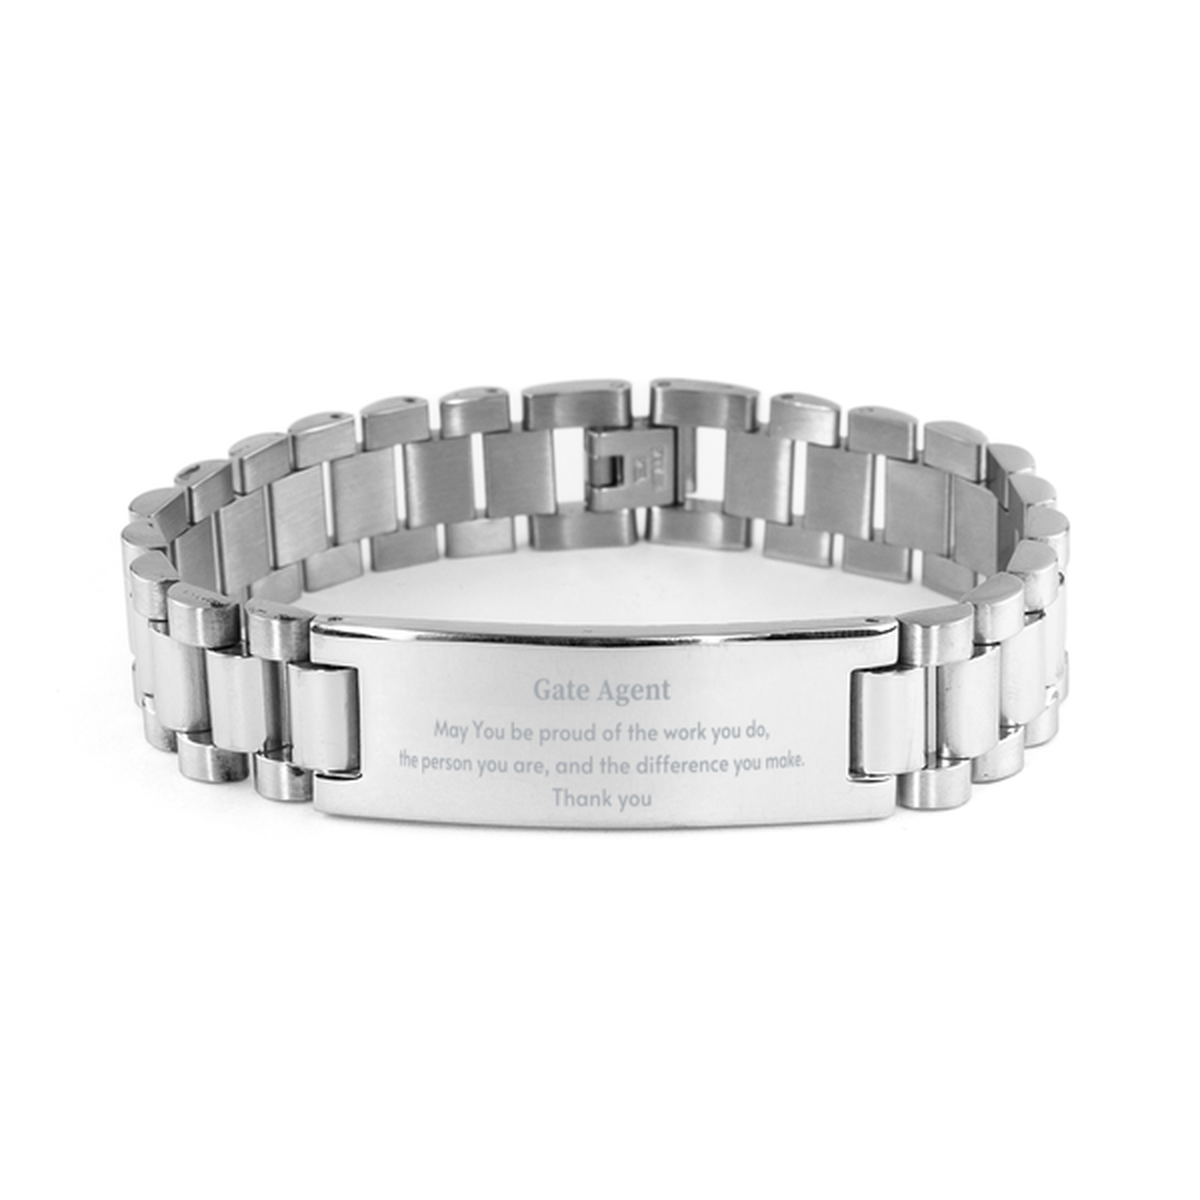 Heartwarming Ladder Stainless Steel Bracelet Retirement Coworkers Gifts for Gate Agent, Gate Agent May You be proud of the work you do, the person you are Gifts for Boss Men Women Friends